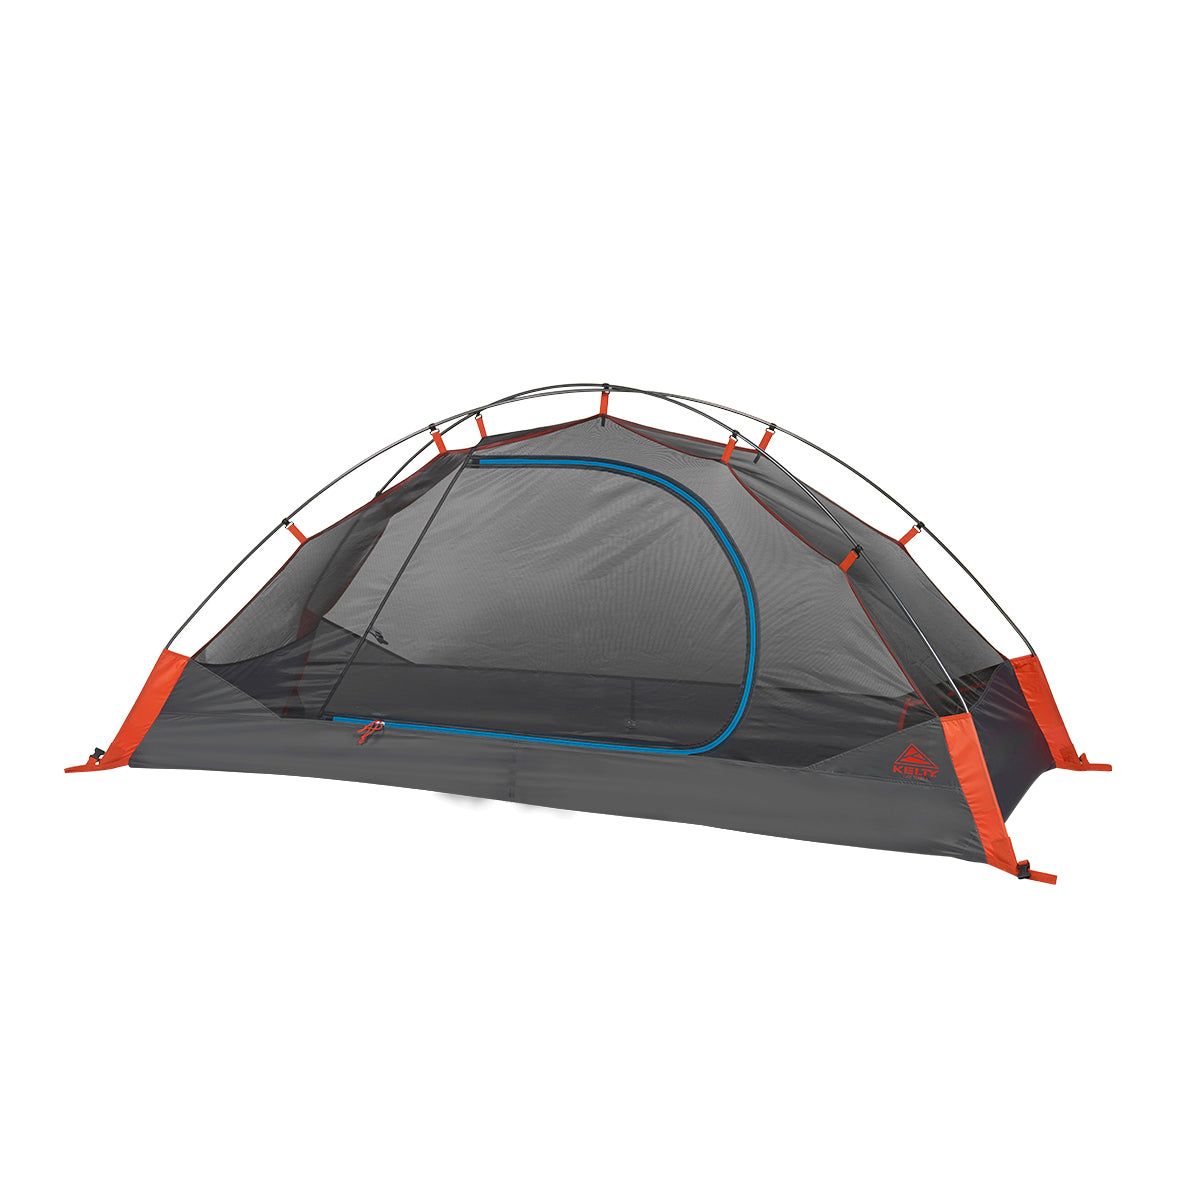 kelty late start 1 person tent without fly in color grey with orange and blue details